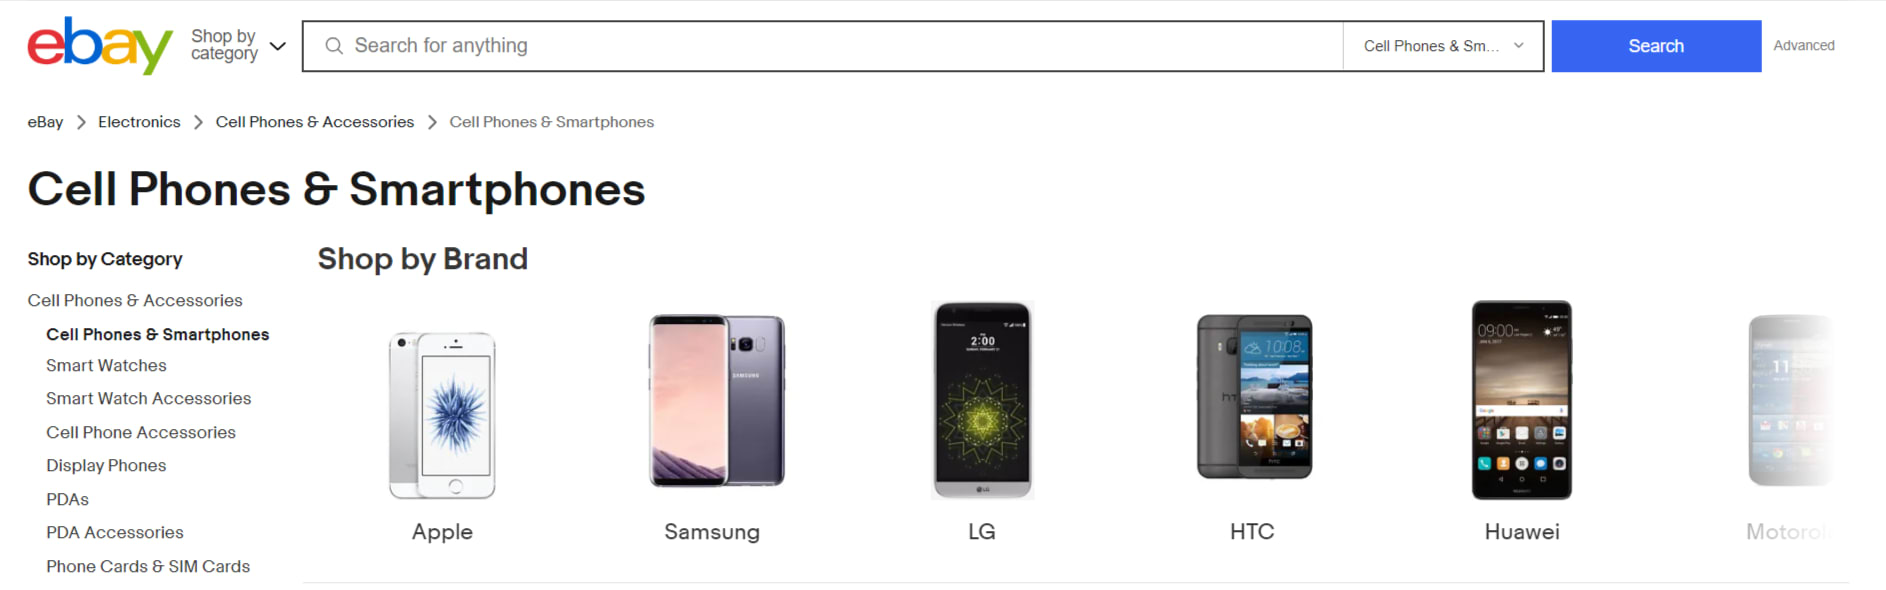 eBay’s marketplace screenshot with cell phone brands for sale